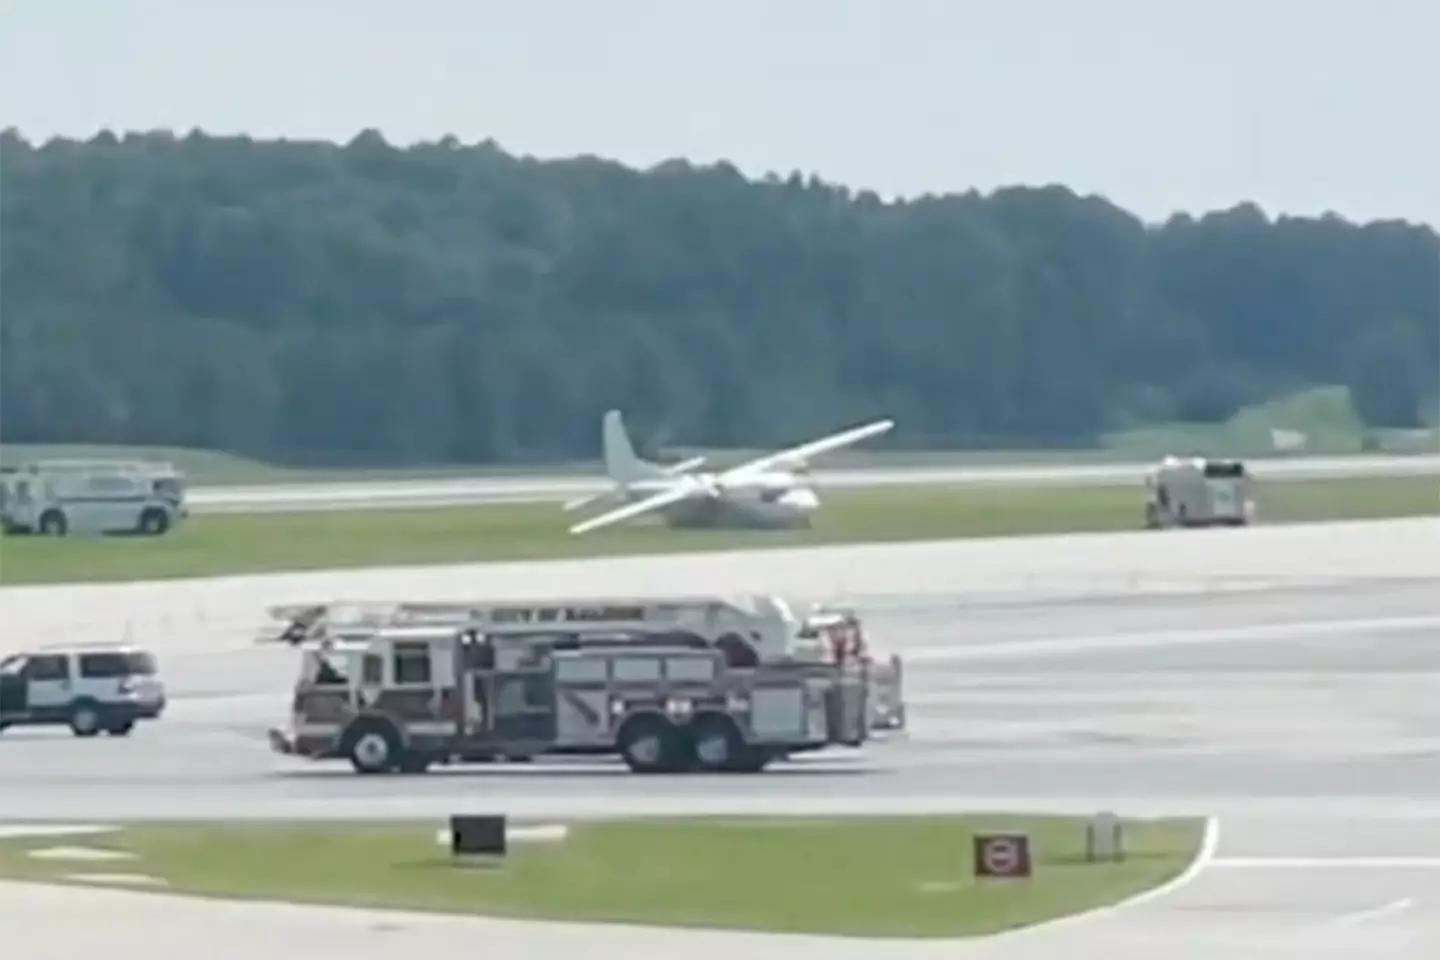 The plane after making an emergency landing at Raleigh Durham International Airport.